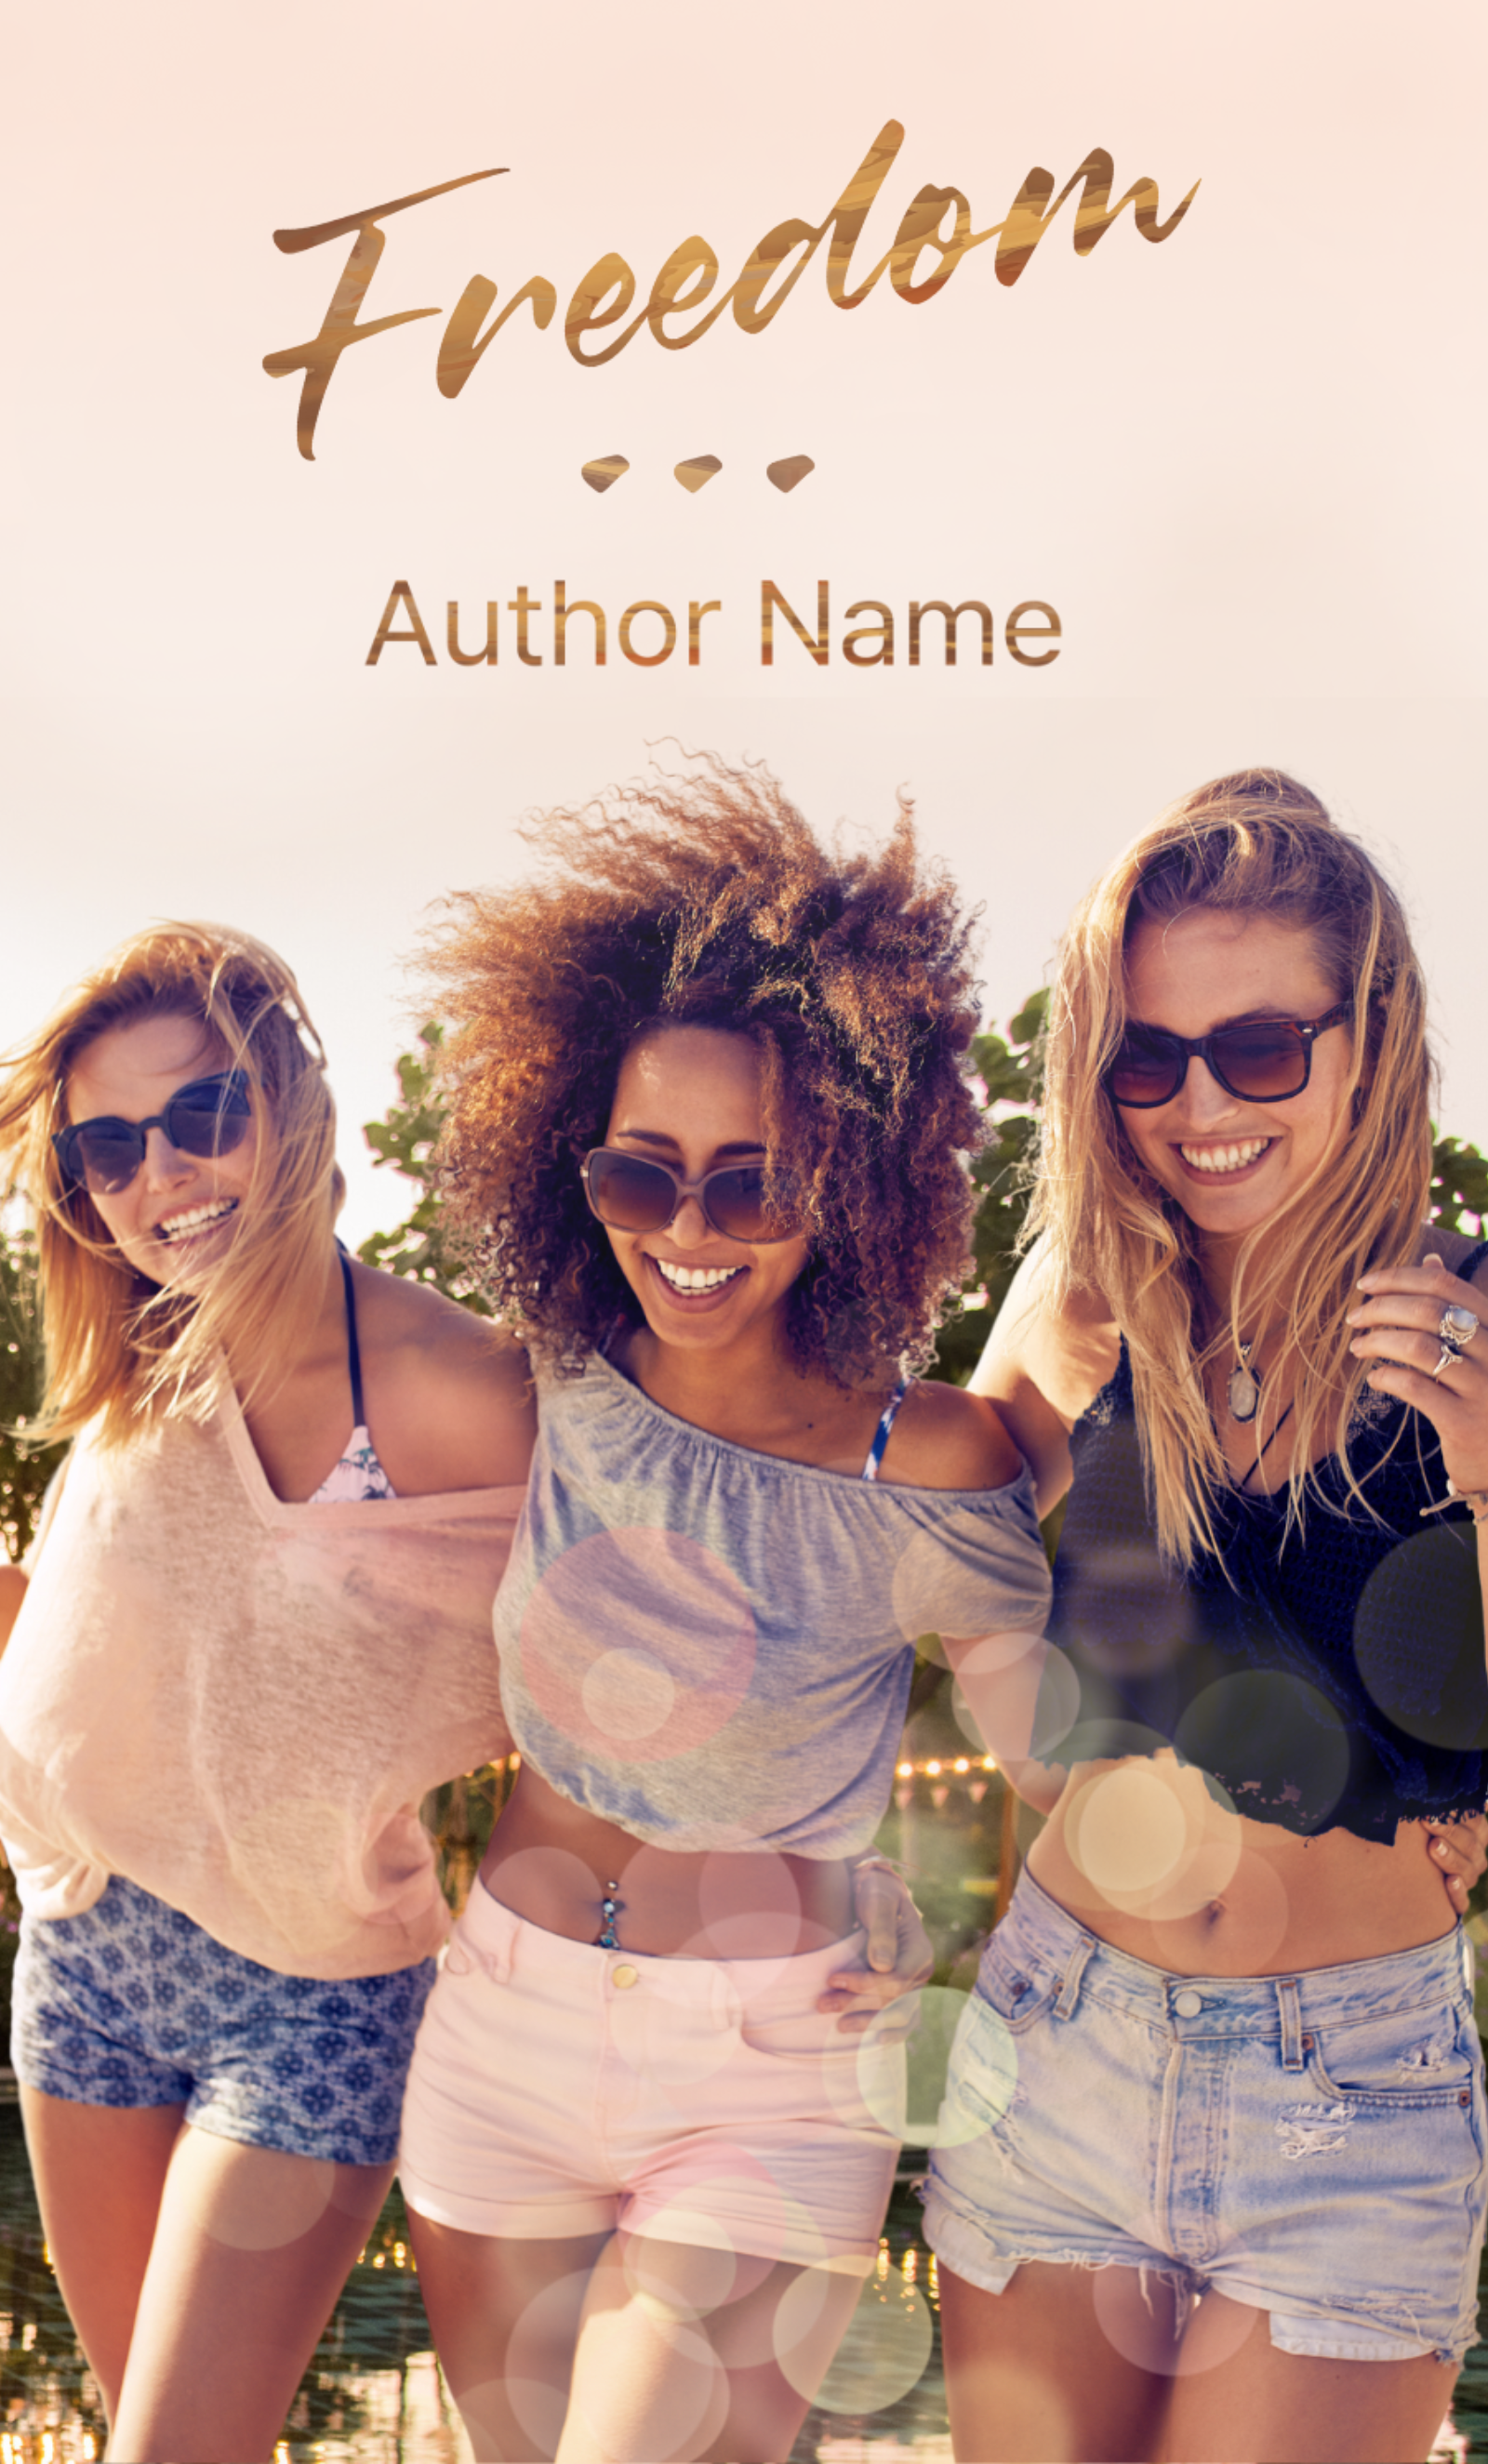 Three women in sunglasses and casual summer outfits stand closely together, smiling under a sunny sky. The words "Premade Ebook & Paperback Book Cover" are written above them in stylized script, and "Author Name" is written below it. Light flares are scattered across the foreground, adding to the joyful atmosphere. BookSelf Book Cover Design & Premade Book Covers